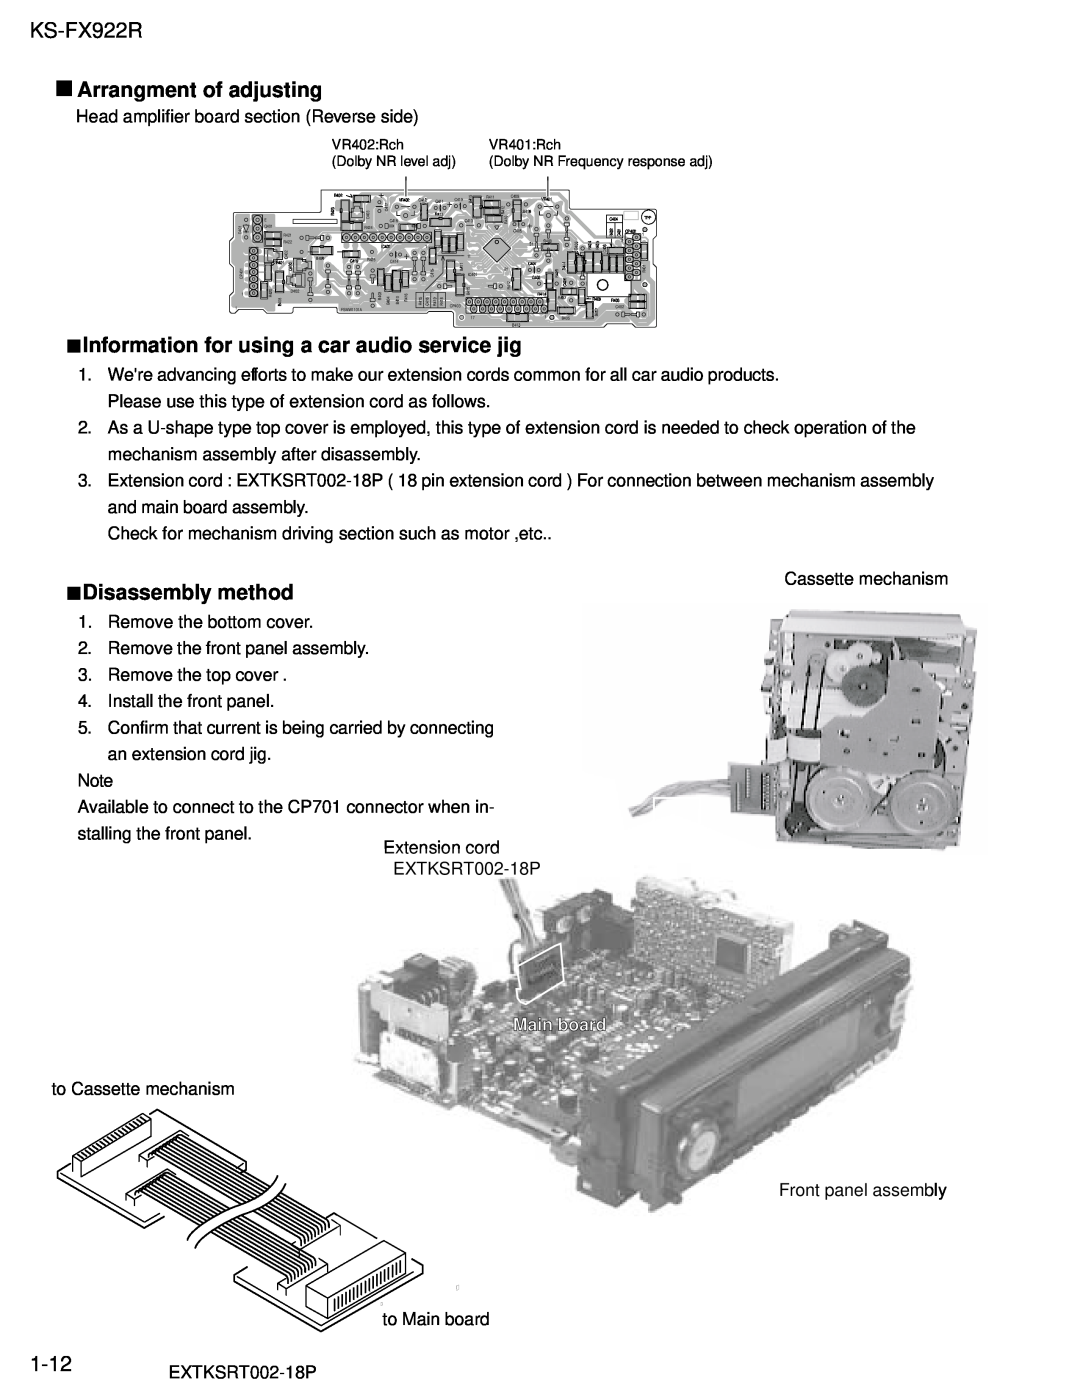 JVC KS-FX922R Arrangment of adjusting, Information for using a car audio service jig, Disassembly method, Main board 